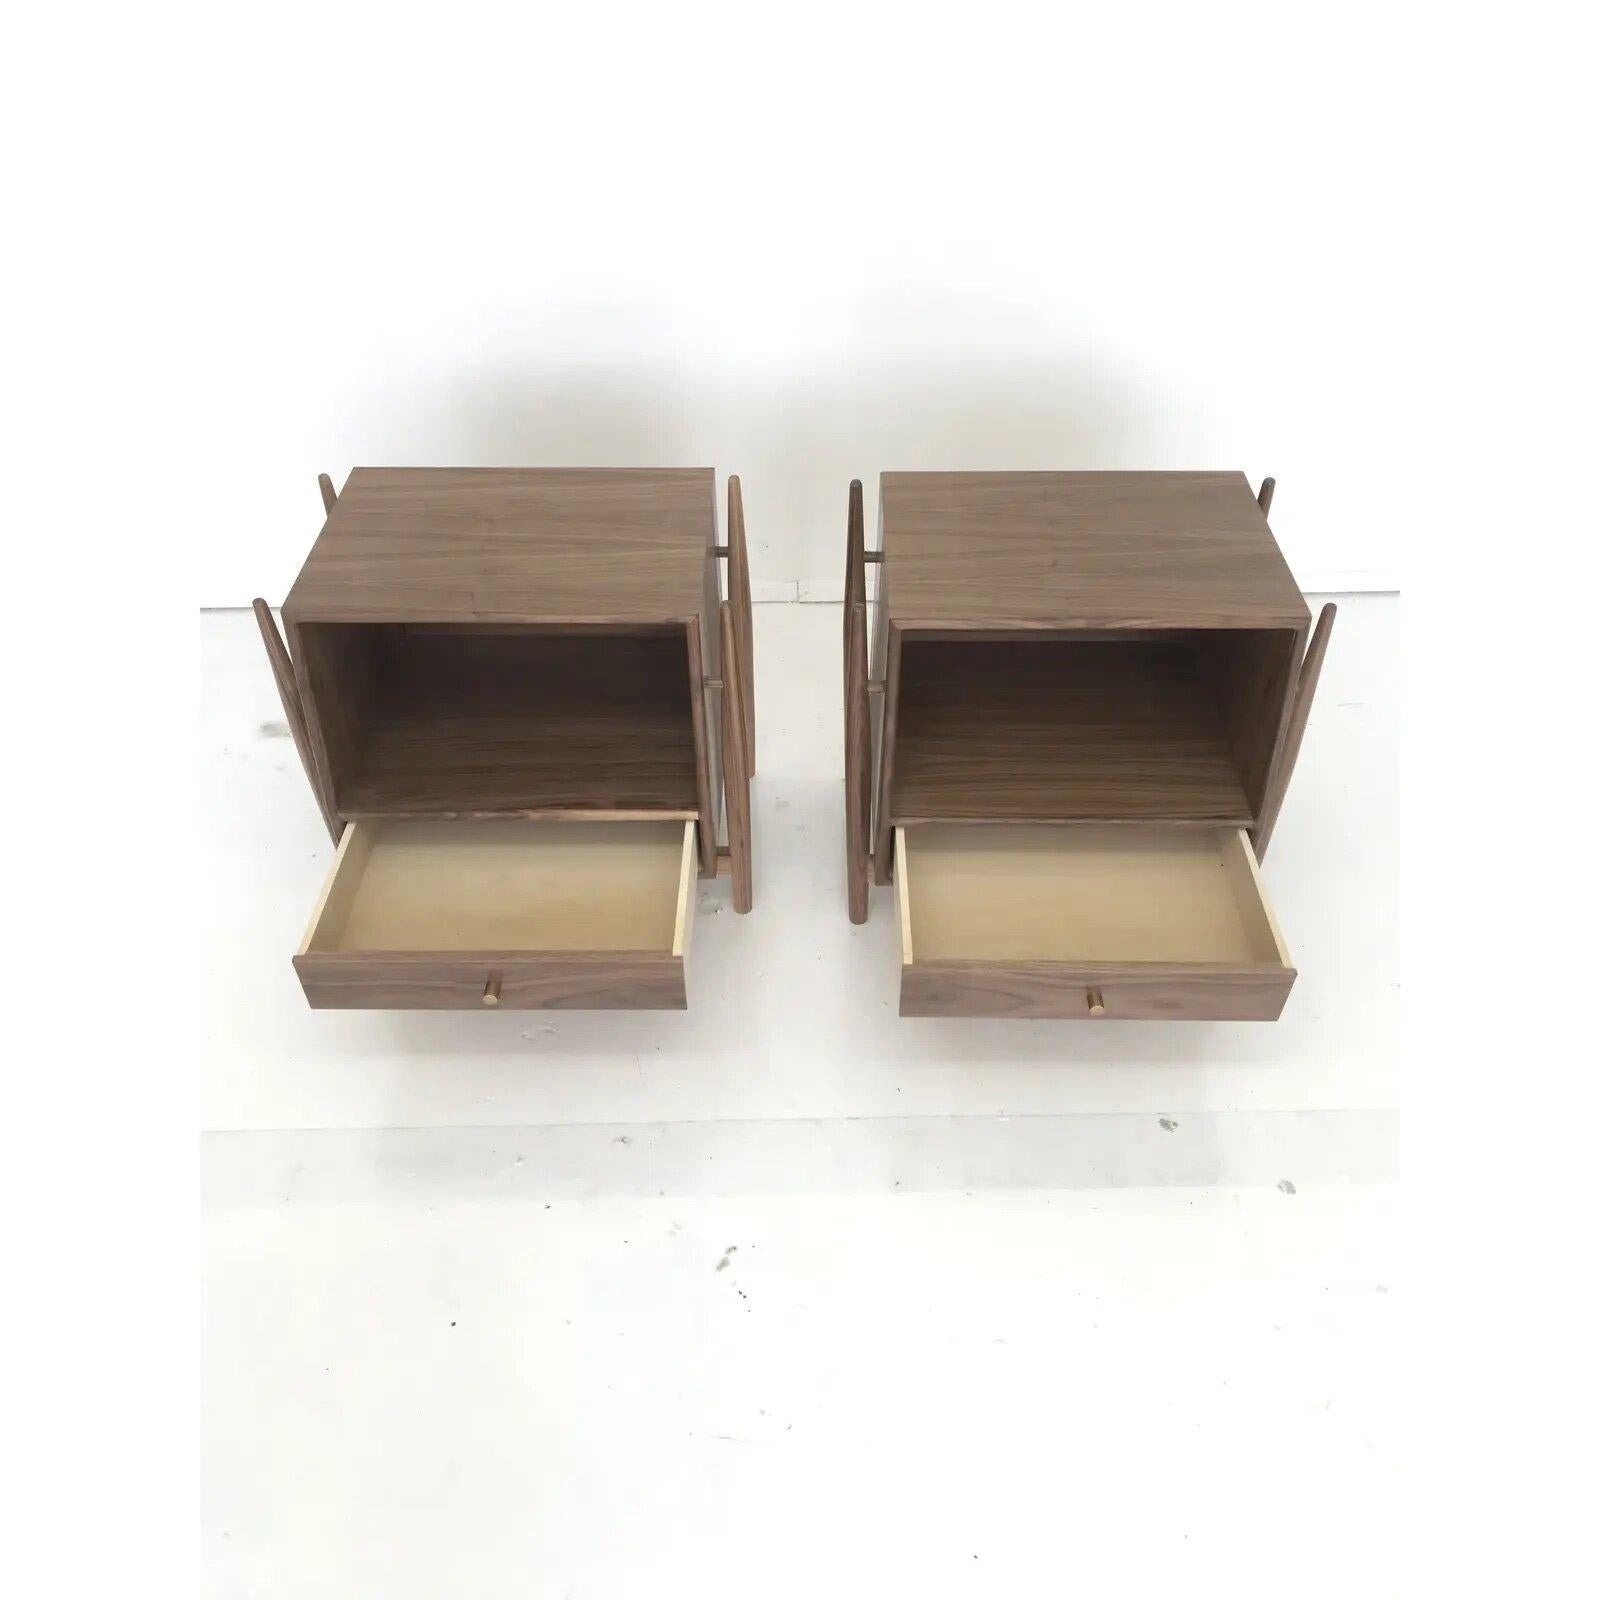 Contemporary pair of nightstands in the style of Kipp Stewart, handcrafted in solid and walnut veneer. This pair shows extraordinary craftsmanship, stunning walnut grain, and a clean and minimal design.

surface space w21 d15
drawer w18.25